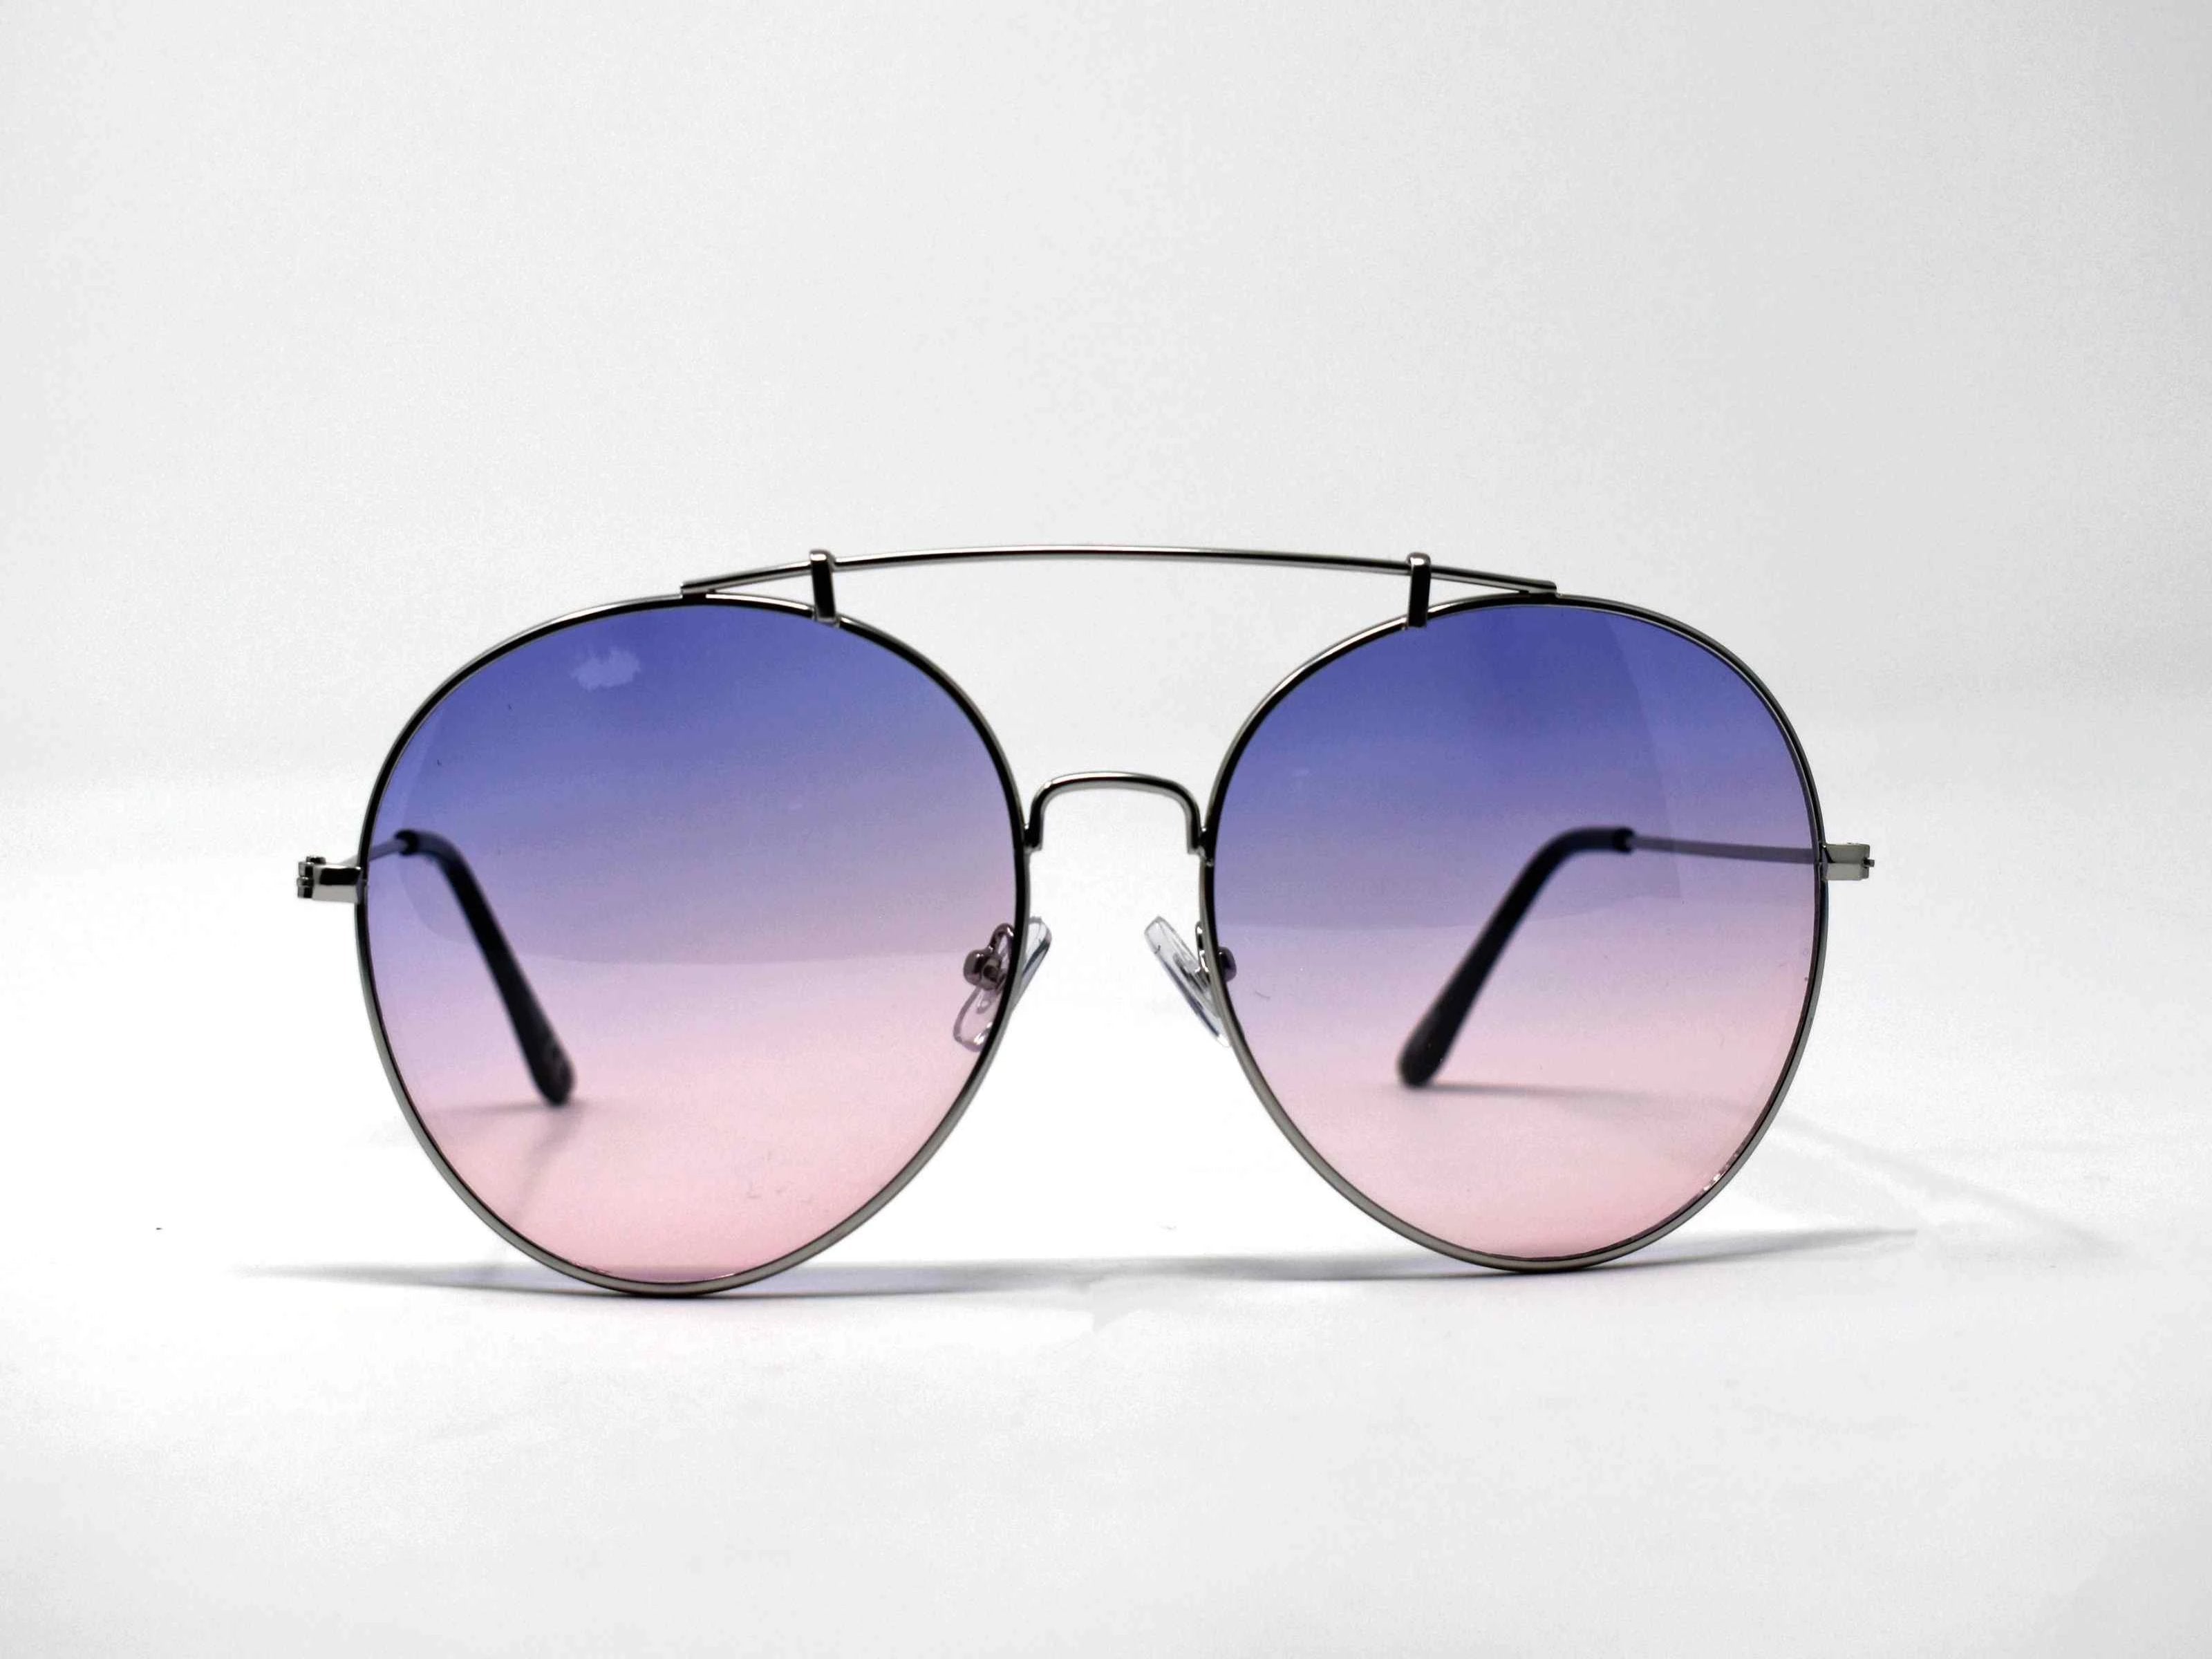 Va Va Voom will be consistently heard in these Vervain silver frame aviator Purple and Pink ombre lens sunglasses.